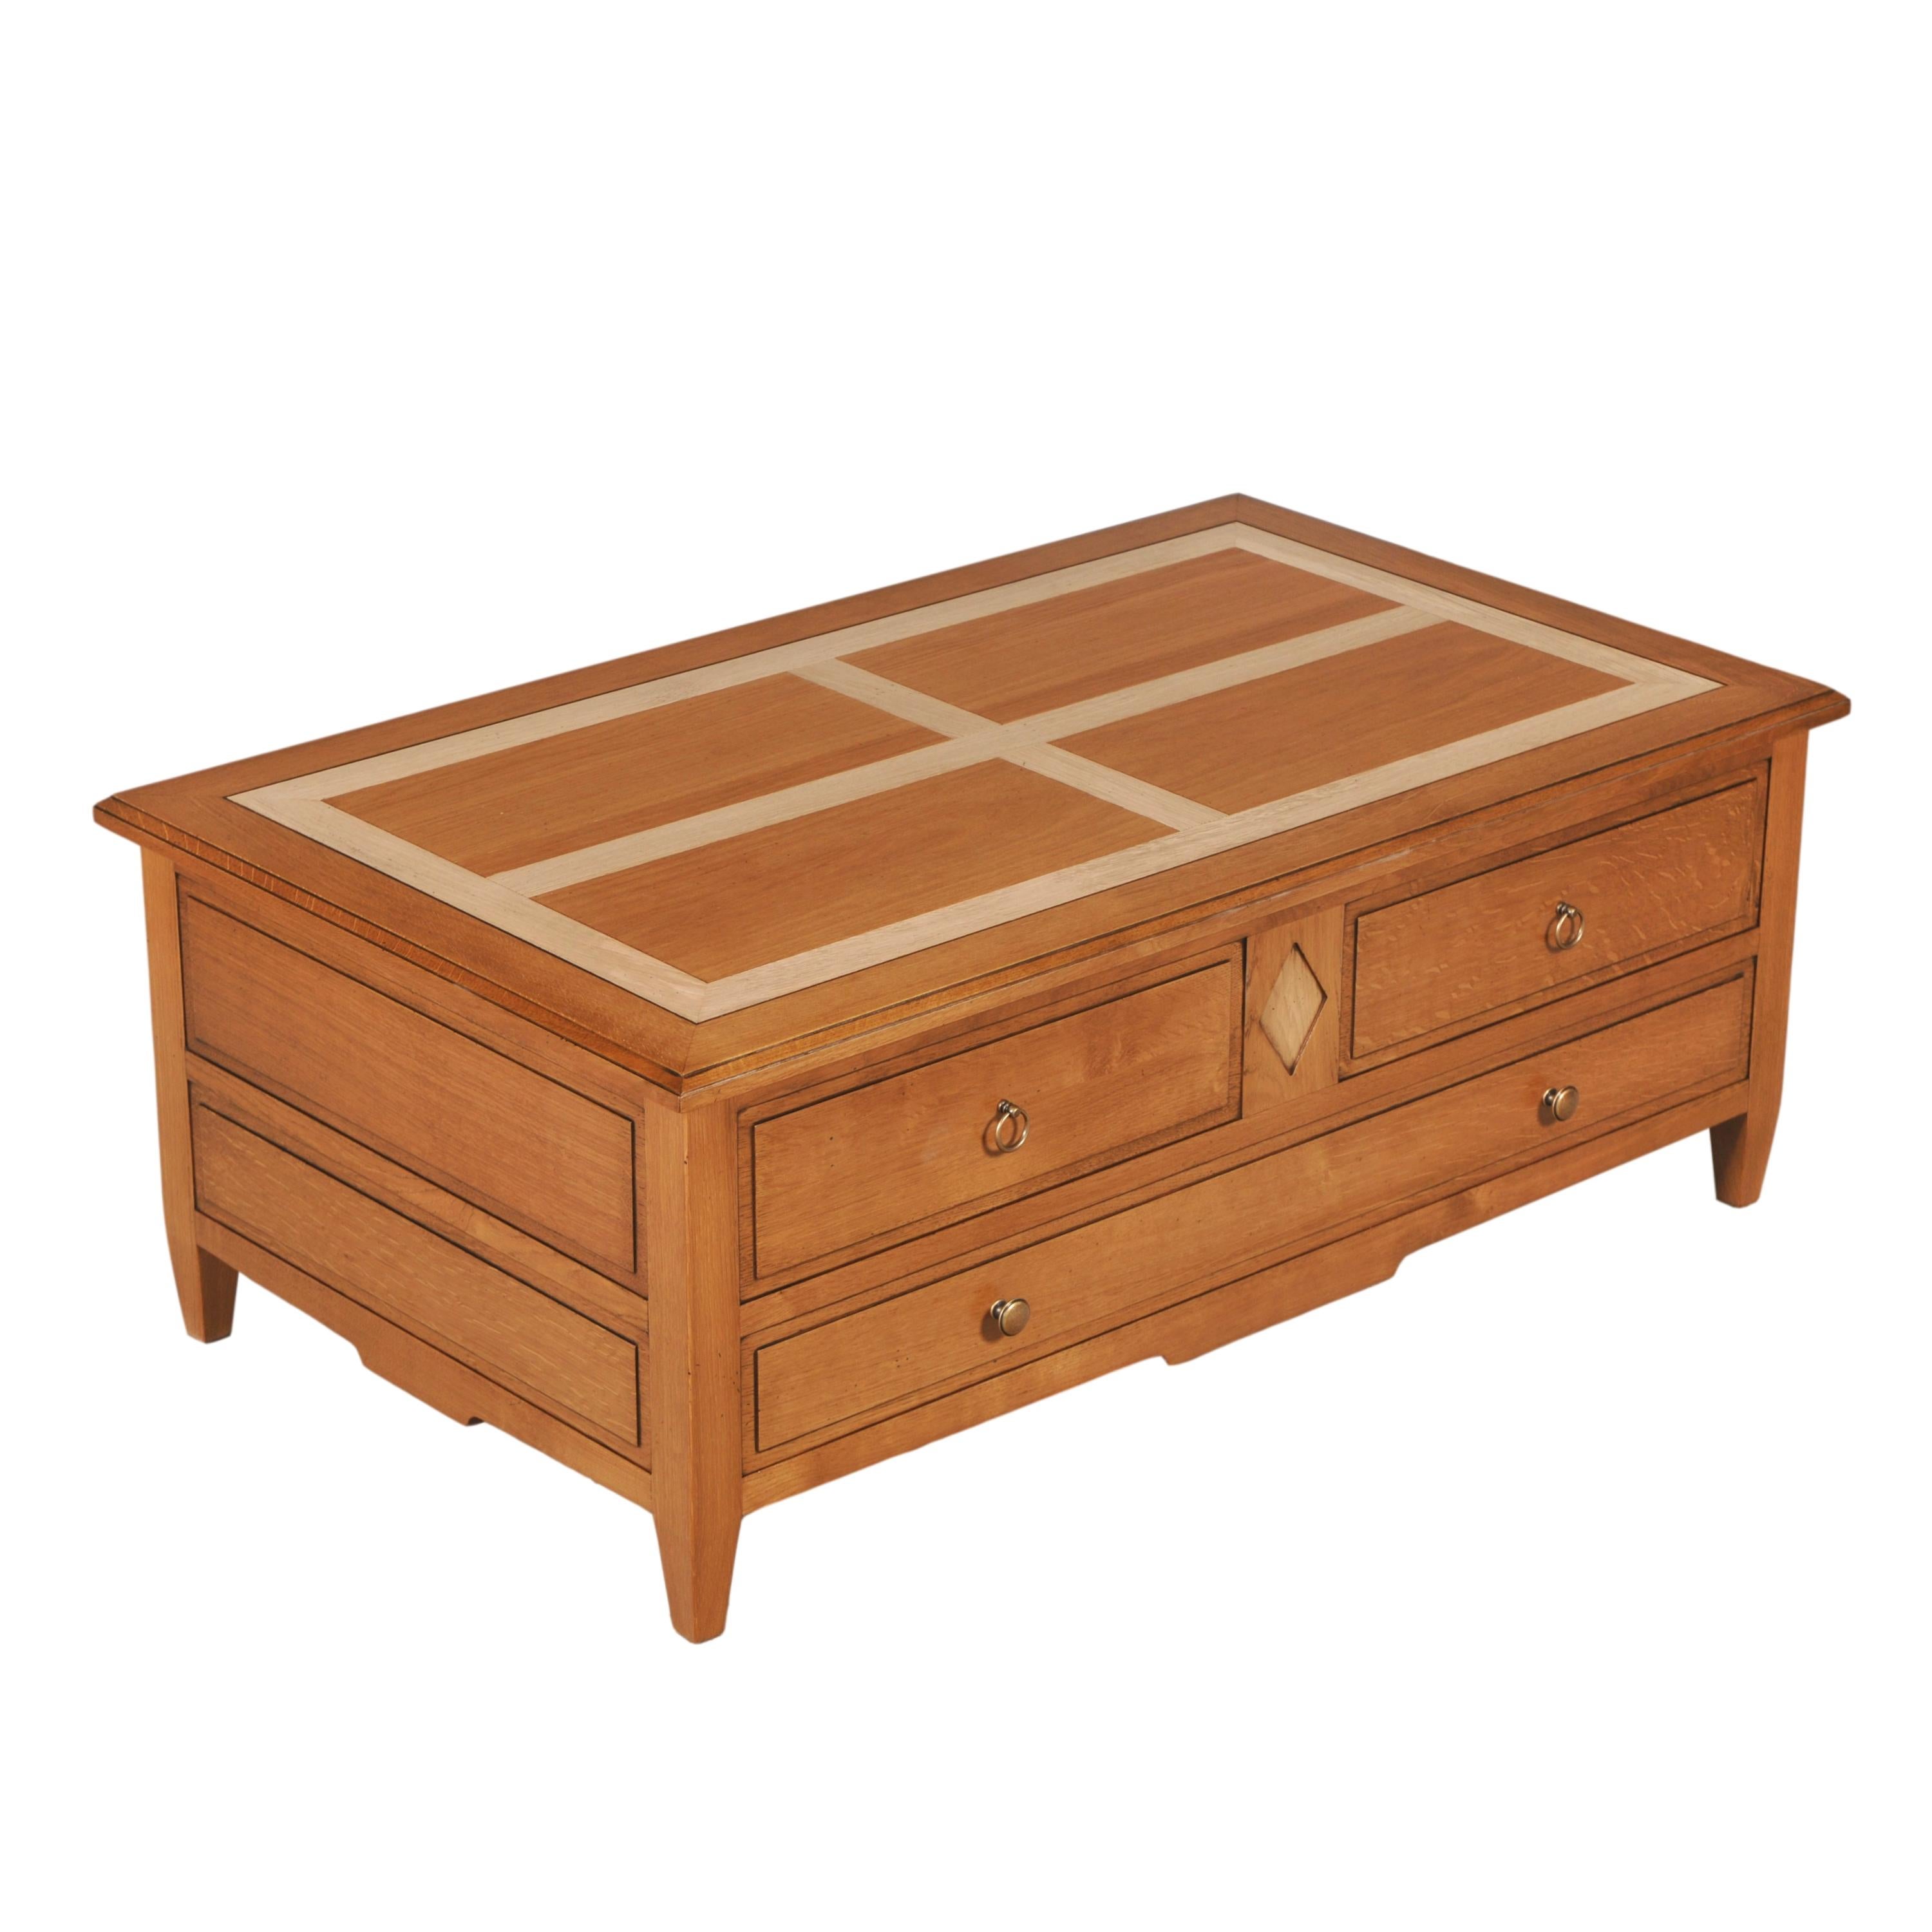 Neoclassical Liftable coffee table for TV diners in solid oak, storage for bottles & glasses For Sale